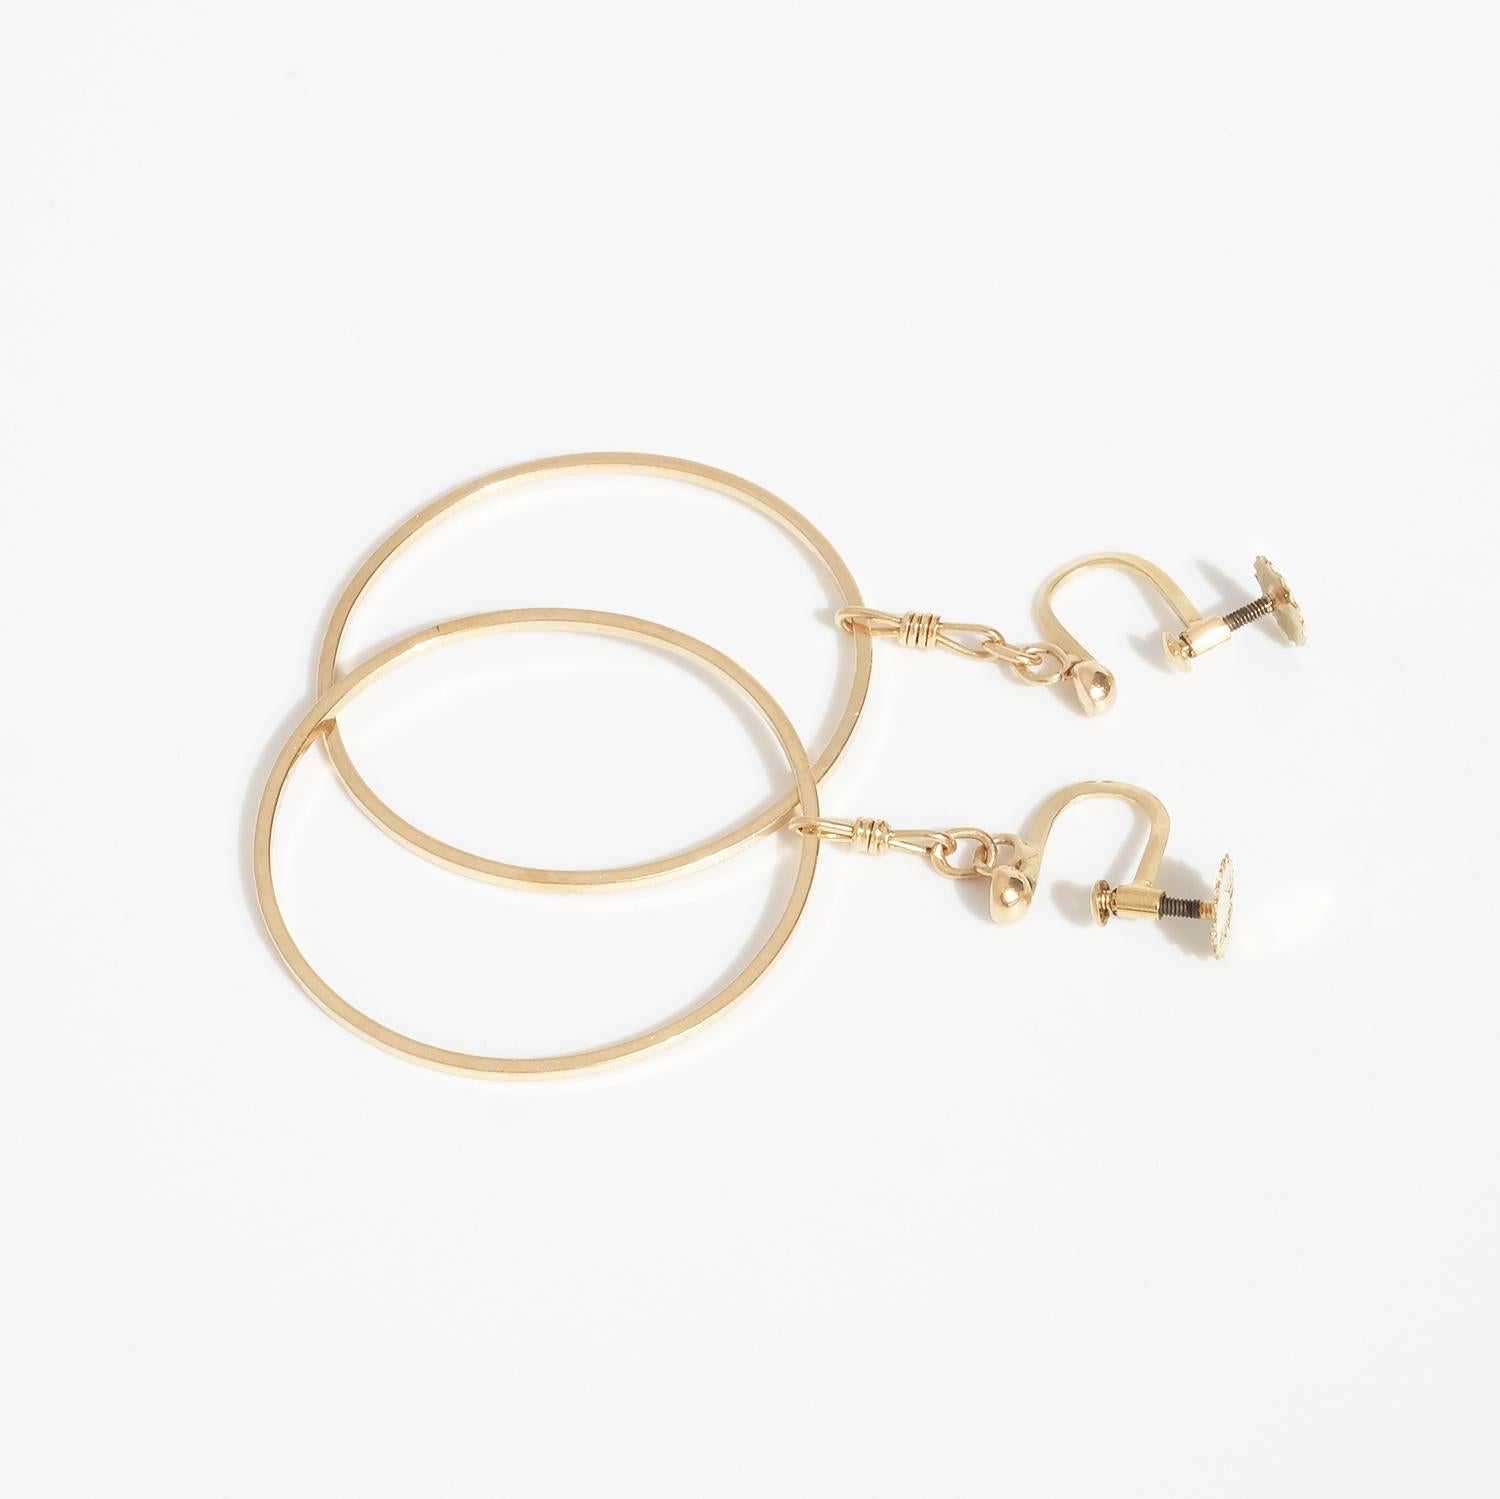 Pair of 18 K Gold Earrings Made in 1956, Swedish 3